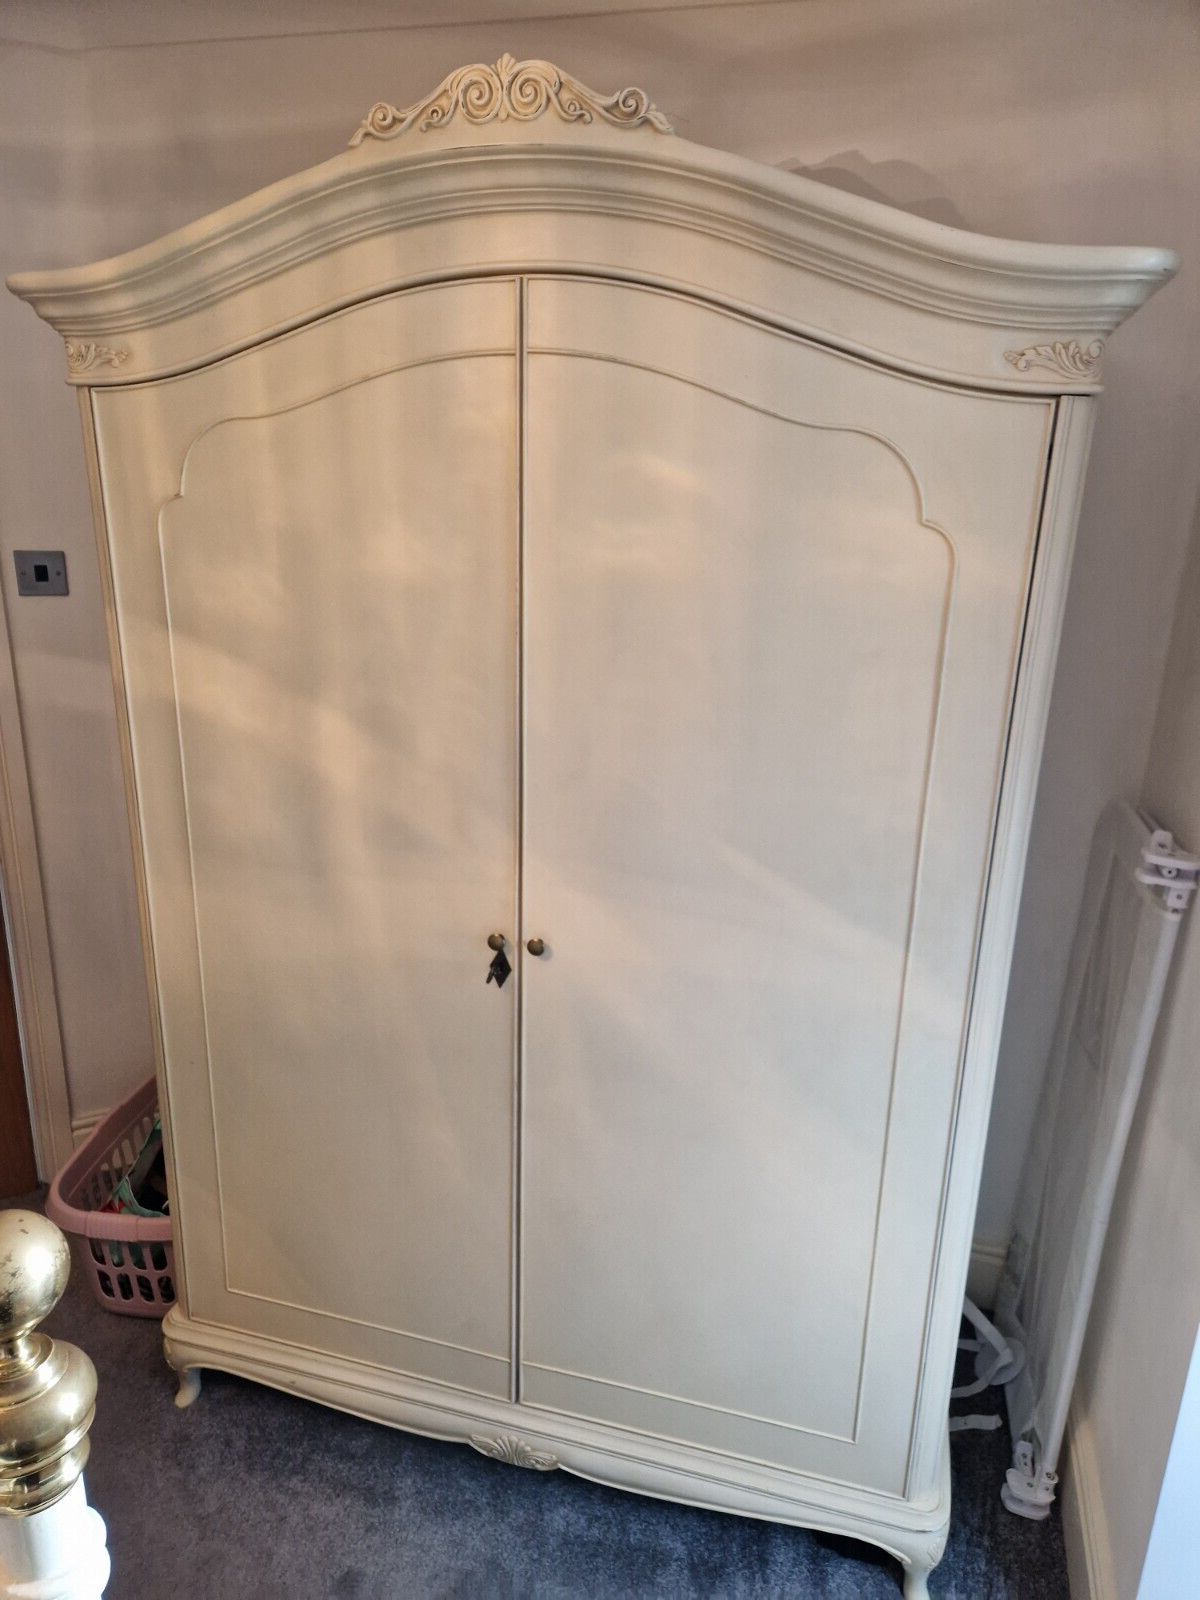 Willis And Gambier Ivory 2 Door Wide Fitted Double Wardrobe | Ebay Intended For Willis And Gambier Wardrobes (Gallery 10 of 20)